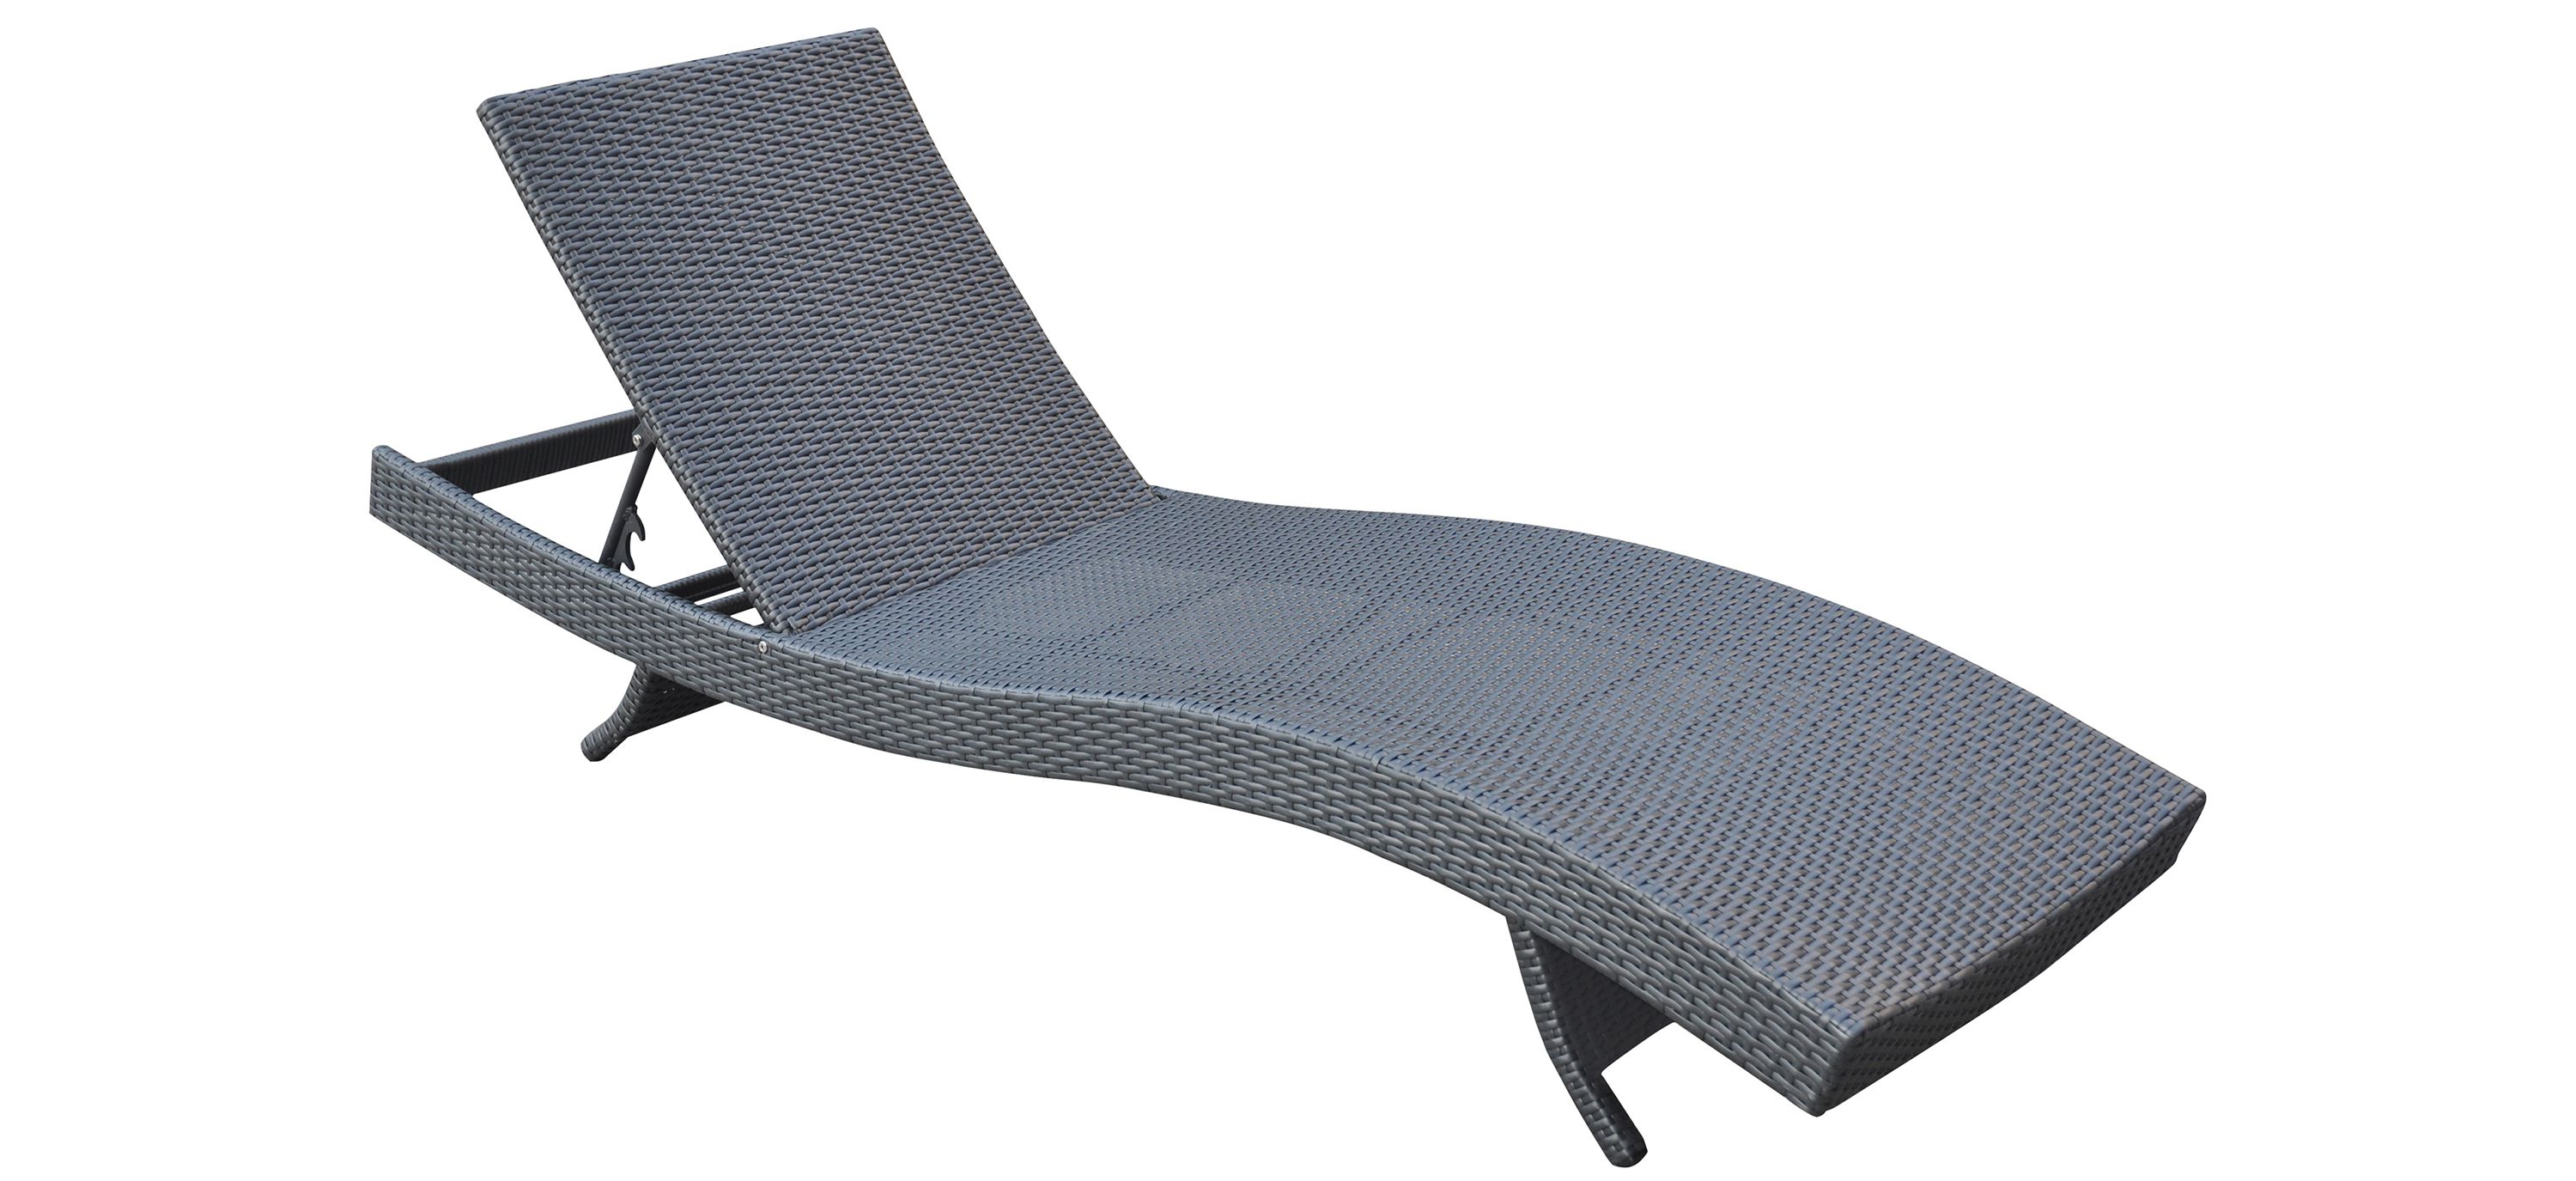 Cabana Outdoor Adjustable Wicker Chaise Lounge